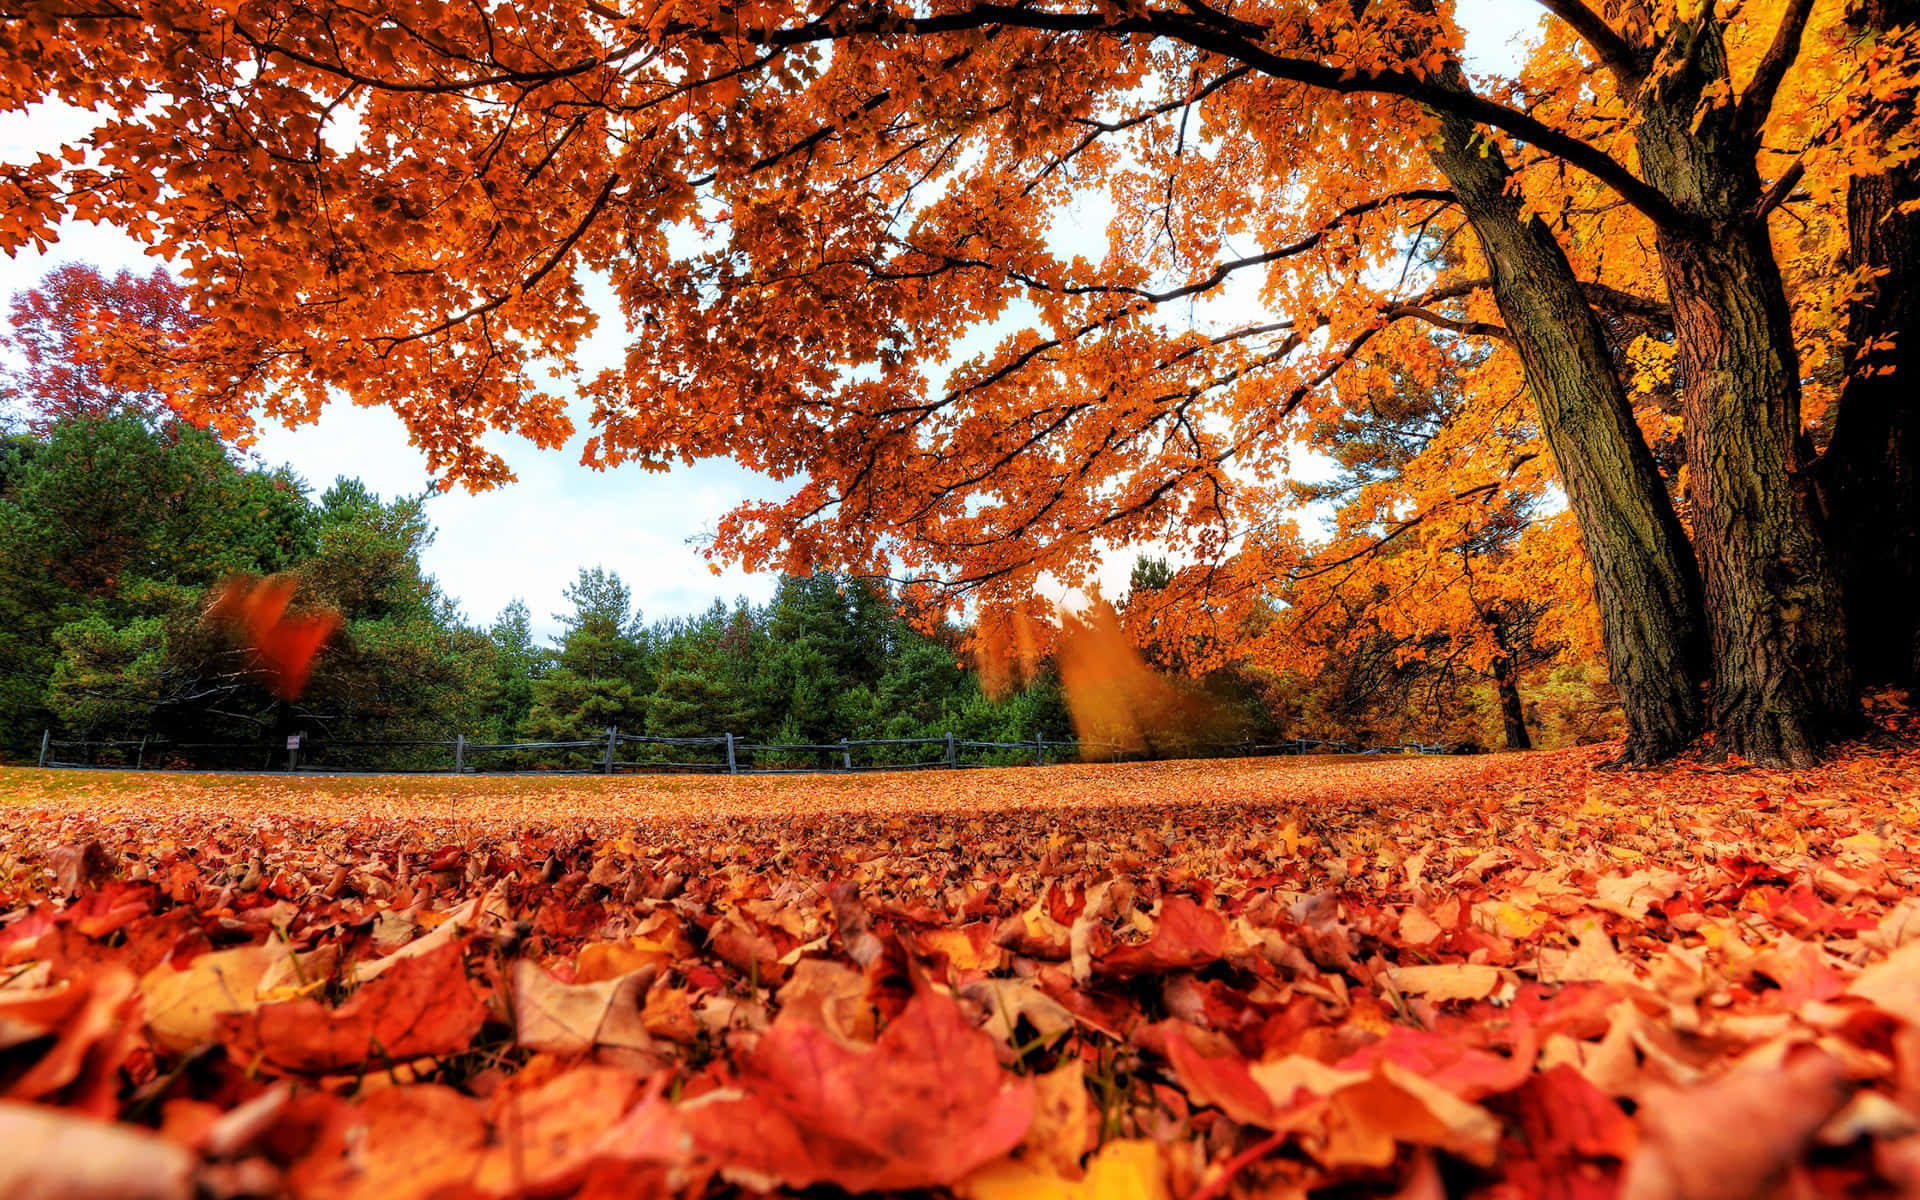 Enjoy the beautiful fall colors with this autumn desktop wallpaper Wallpaper